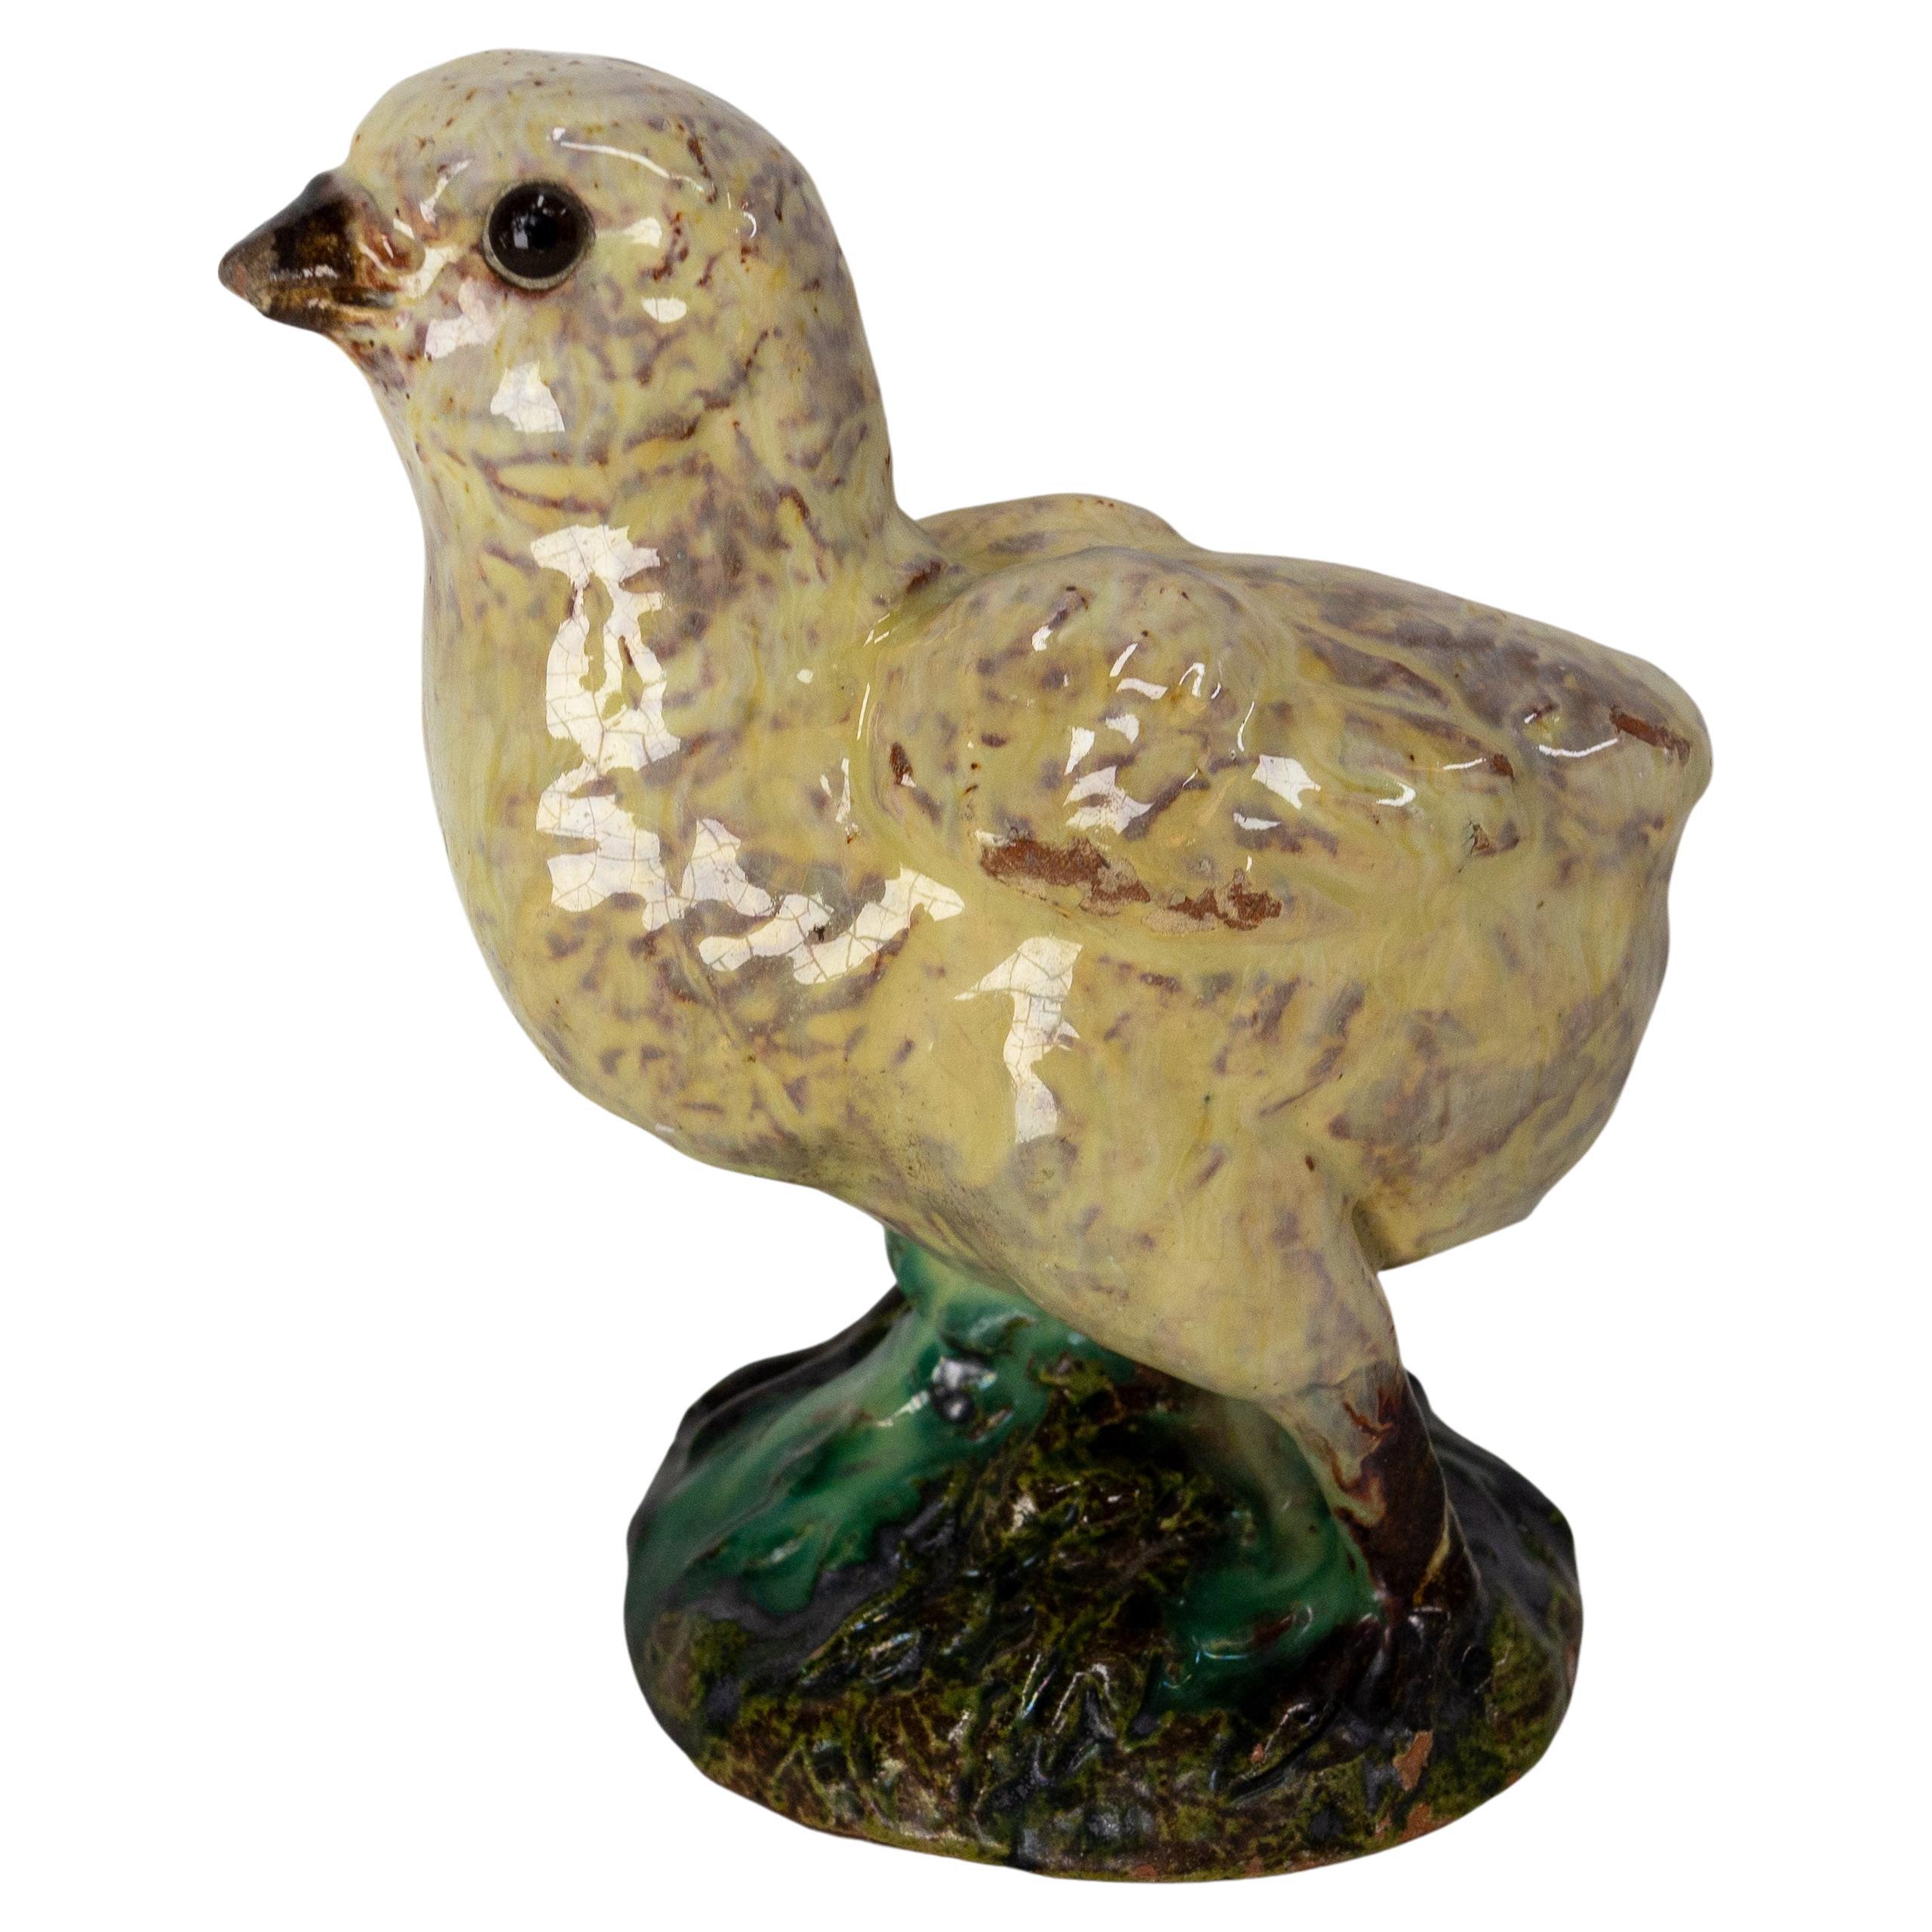 Chick Statuette Terracotta & Faience Signed J. Filmont, circa 1900 C For Sale